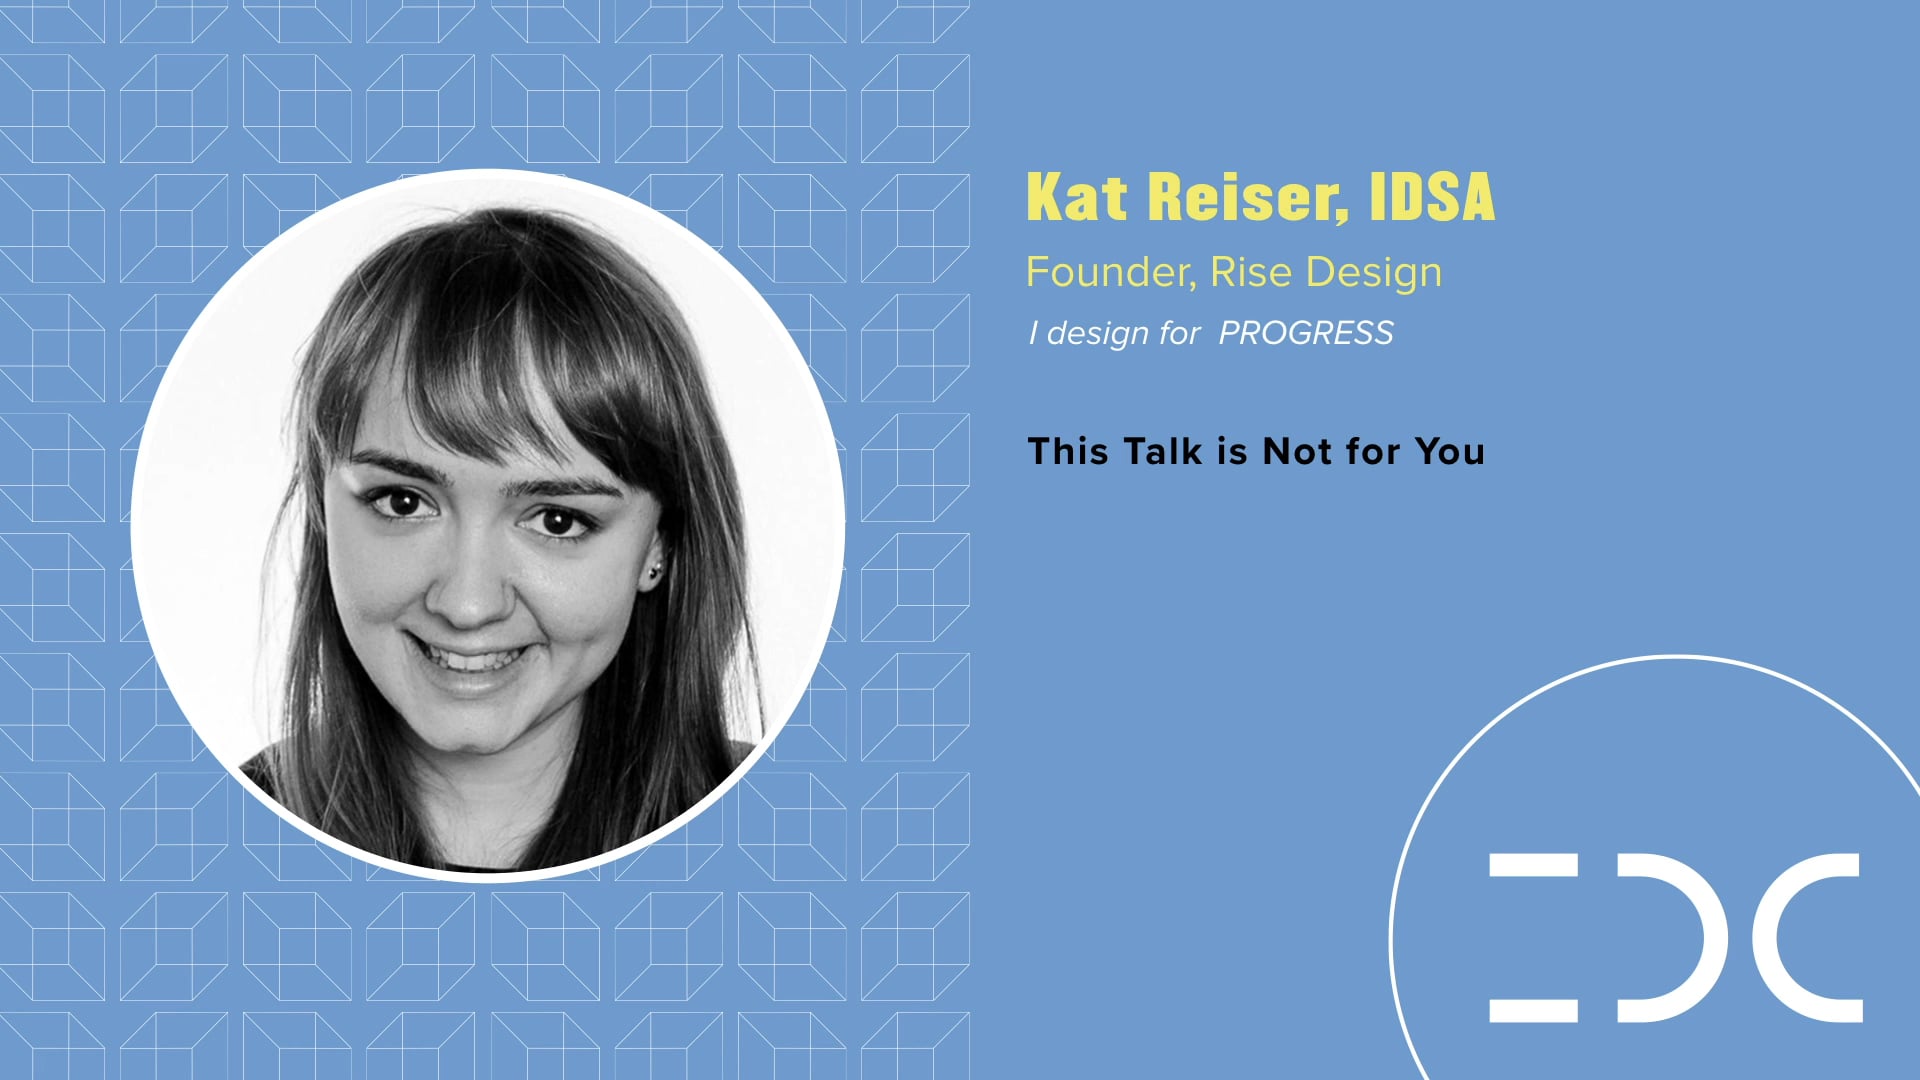 Kat Reiser - This Talk Is Not For You